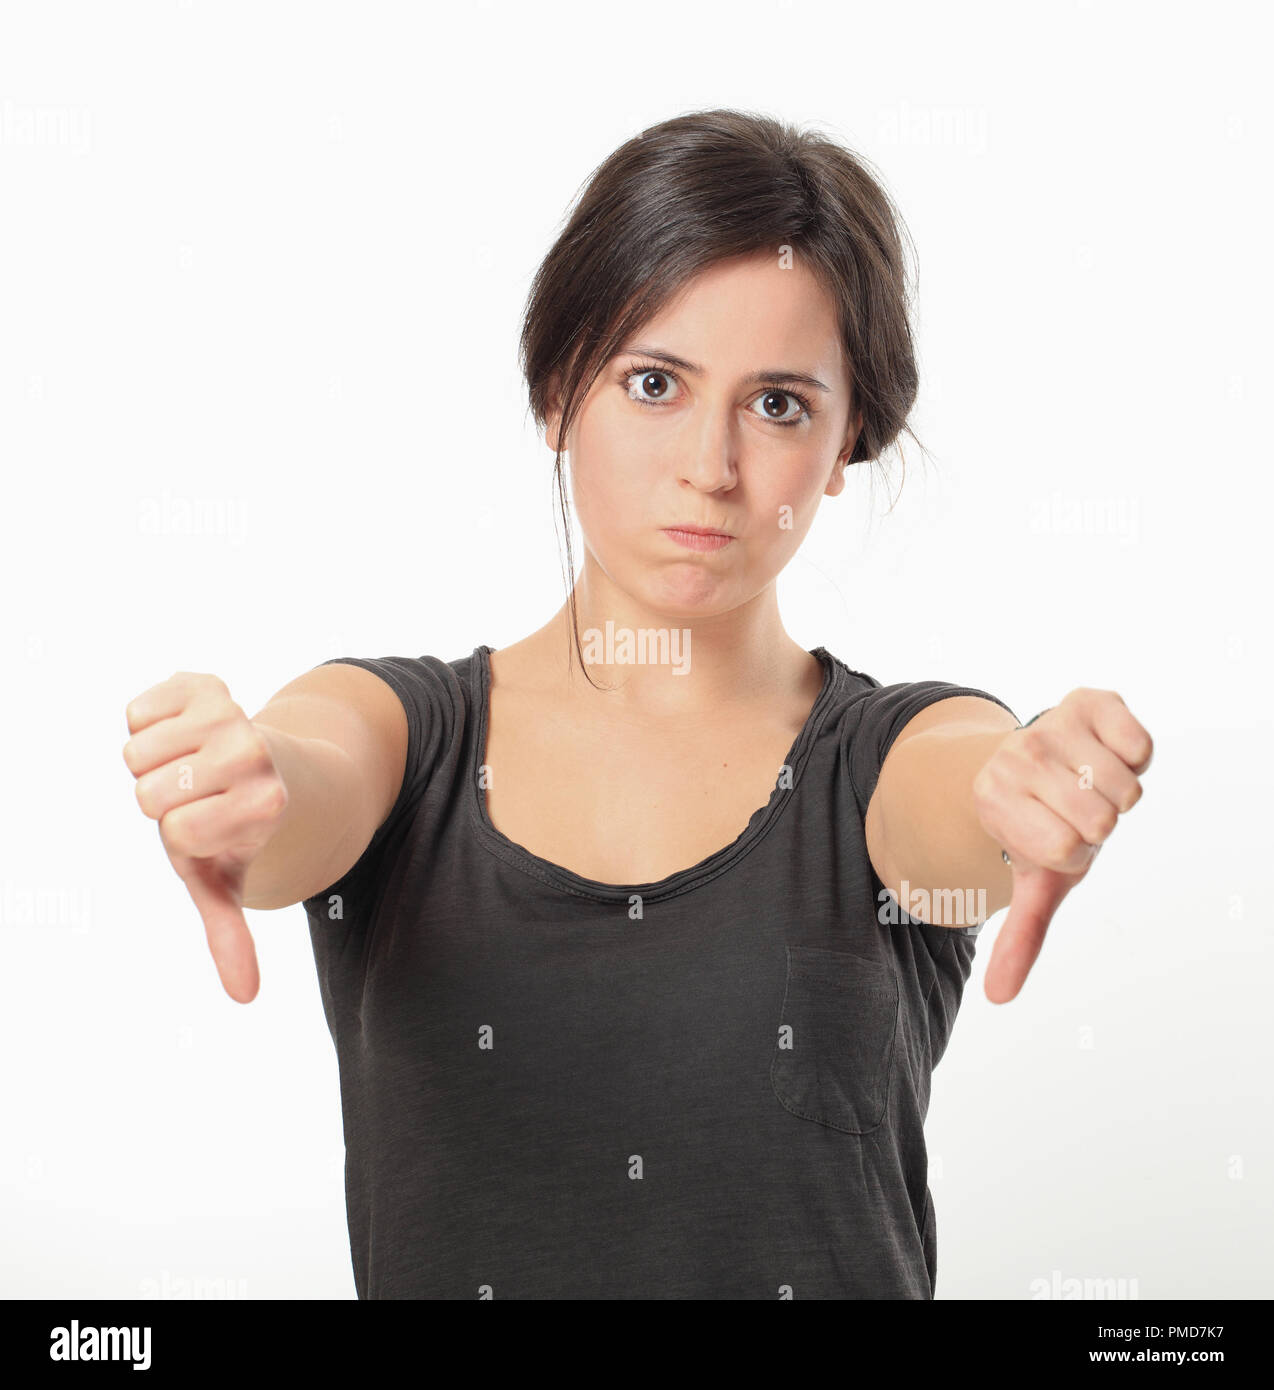 Young angry woman thumbs down Stock Photo